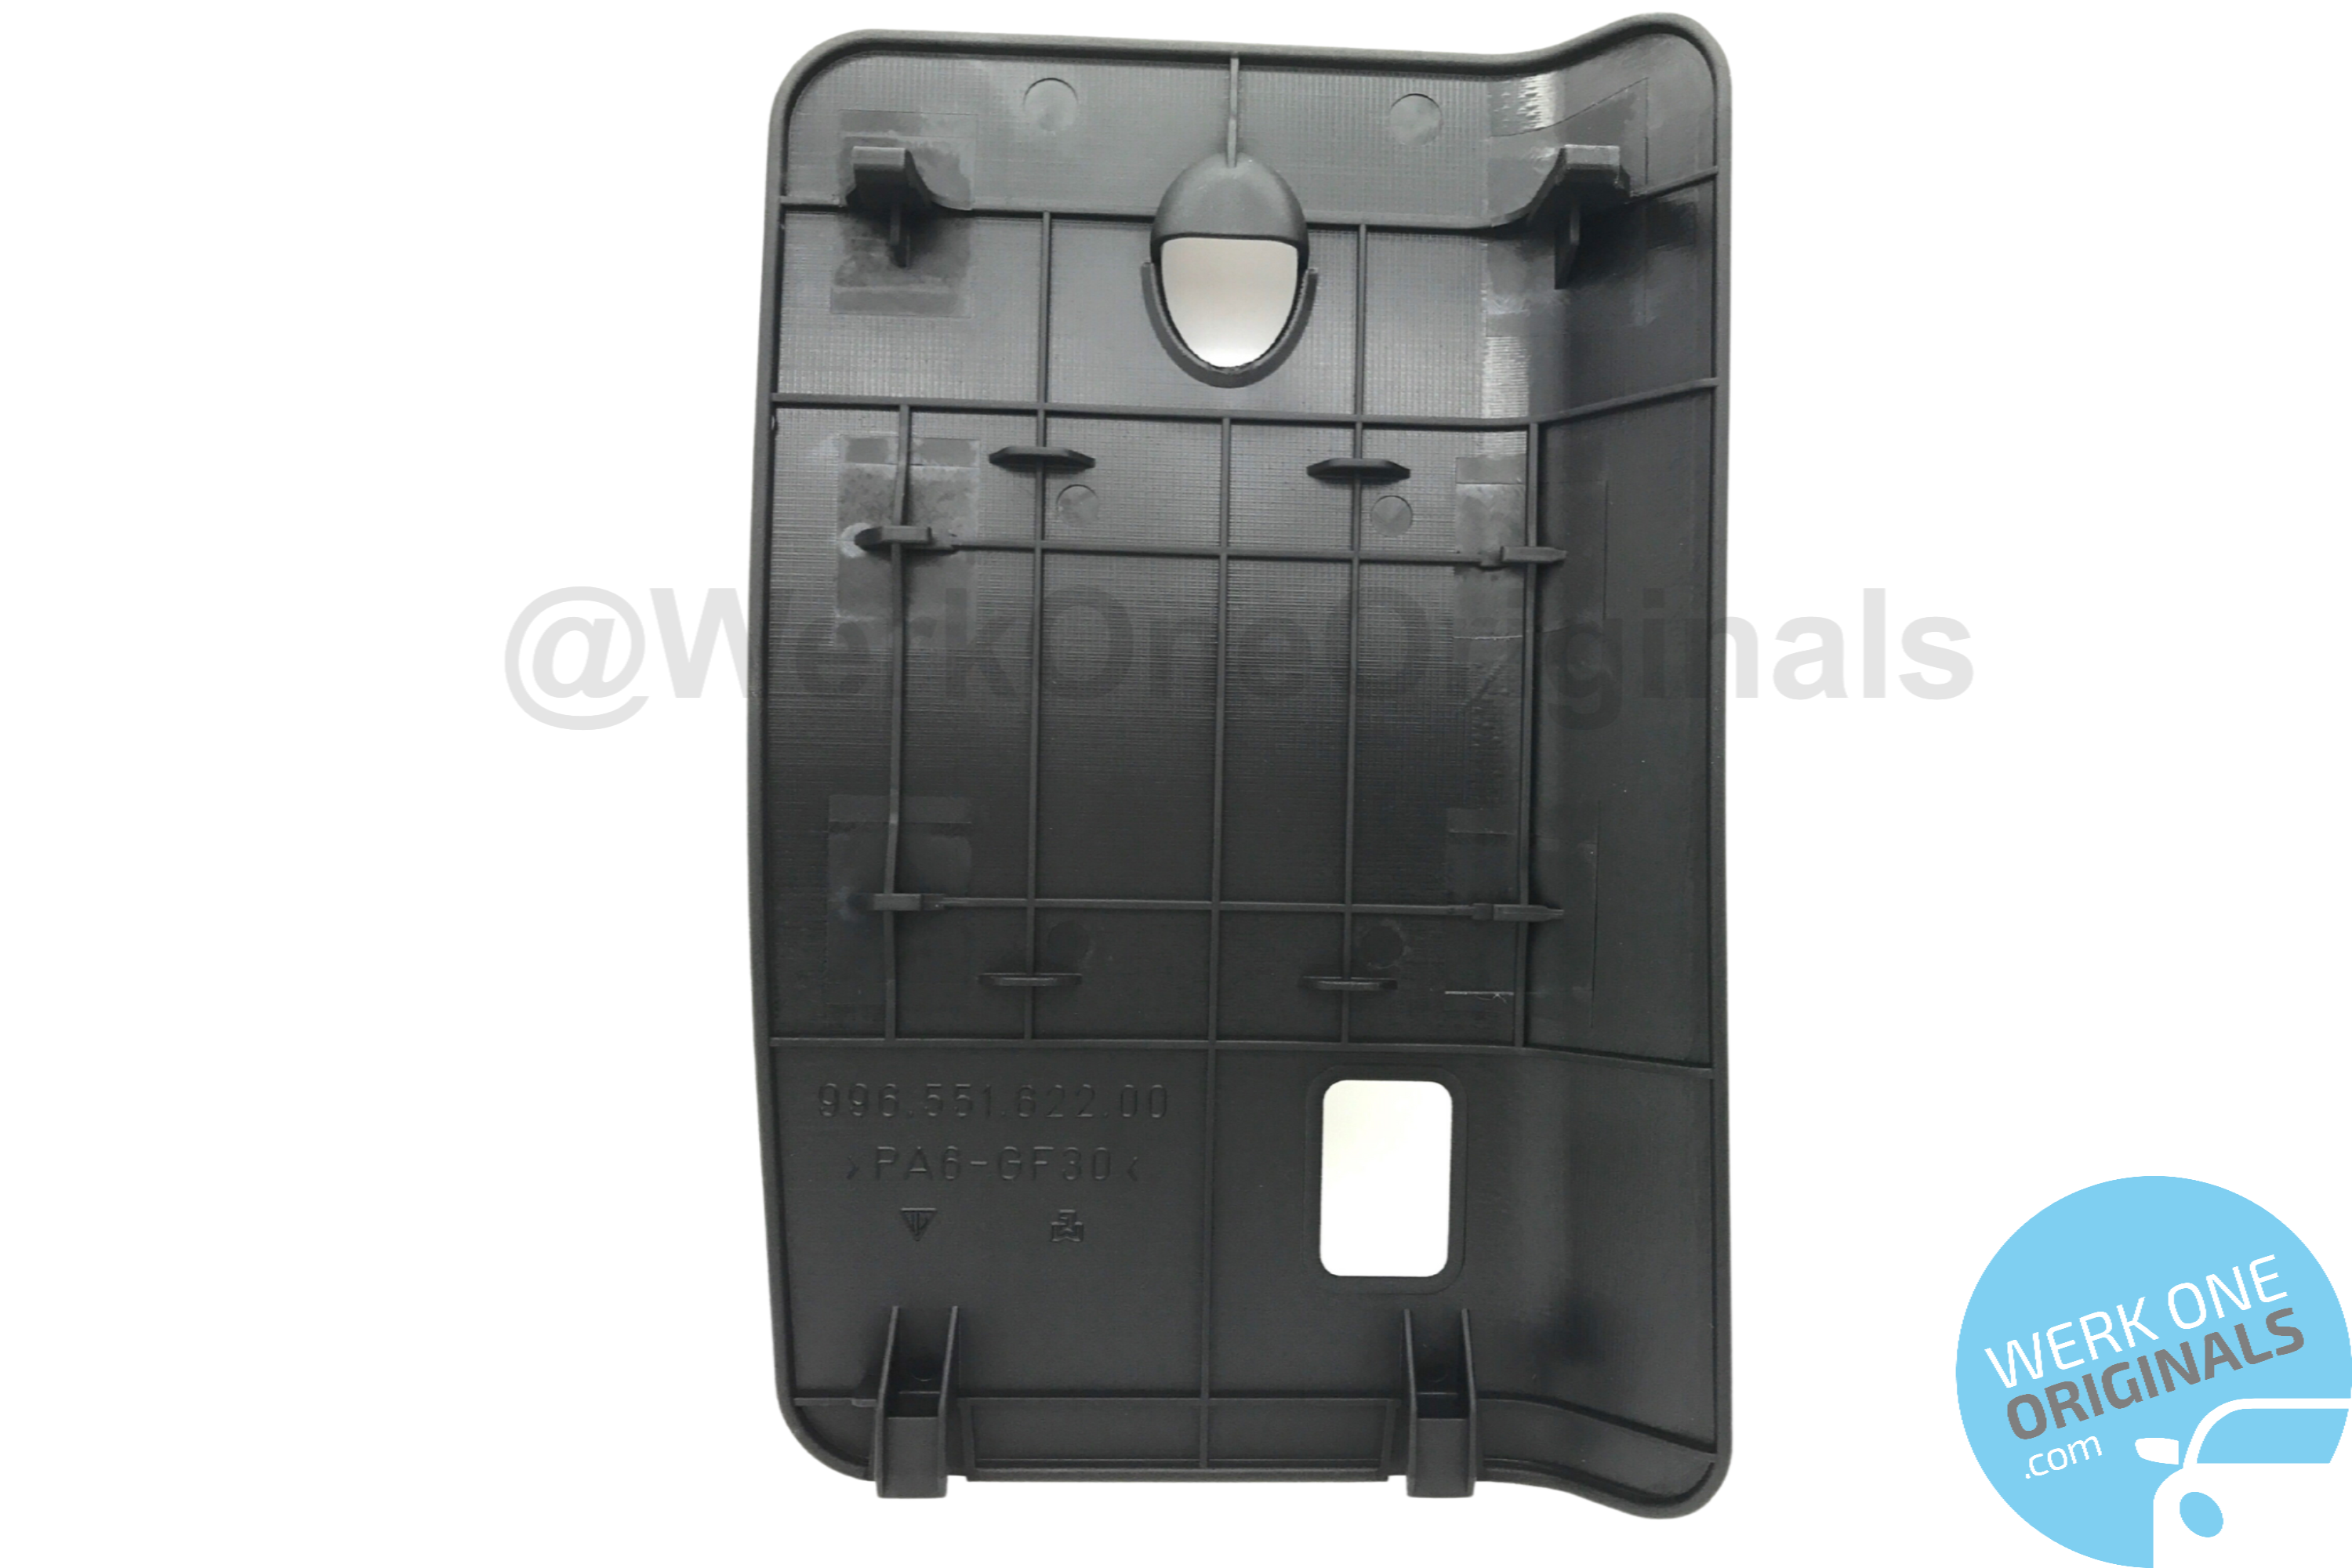 Porsche Fuse Box Cover Lid for 911 Type 996 RHD Models